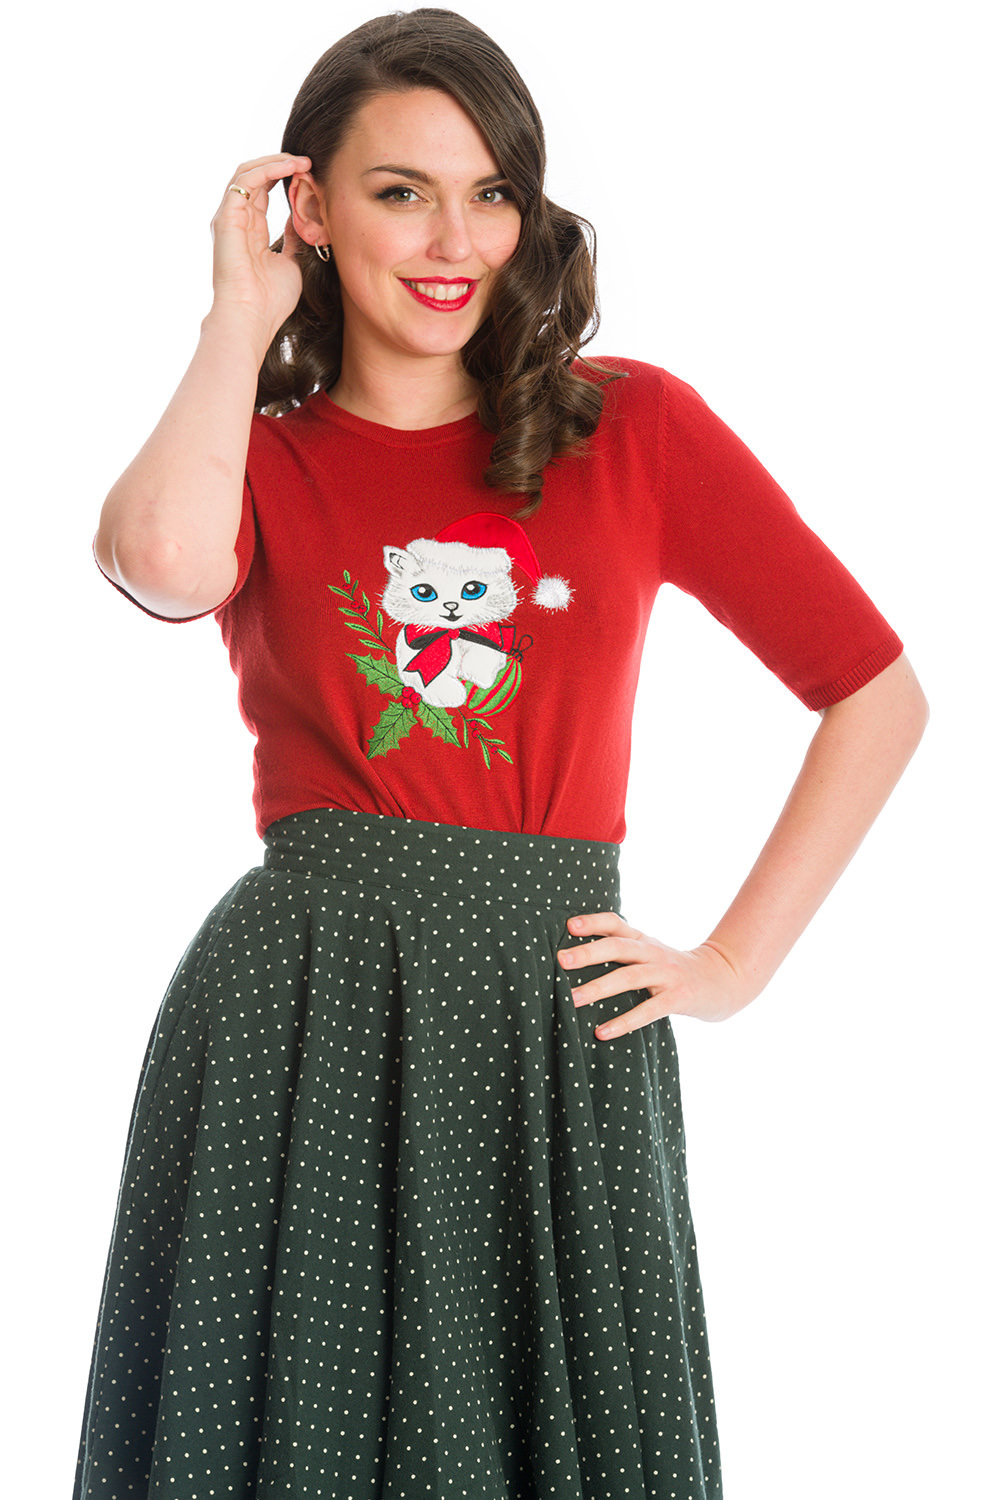 Banned Retro 50s Christmas Holly Cat Jumper in Red